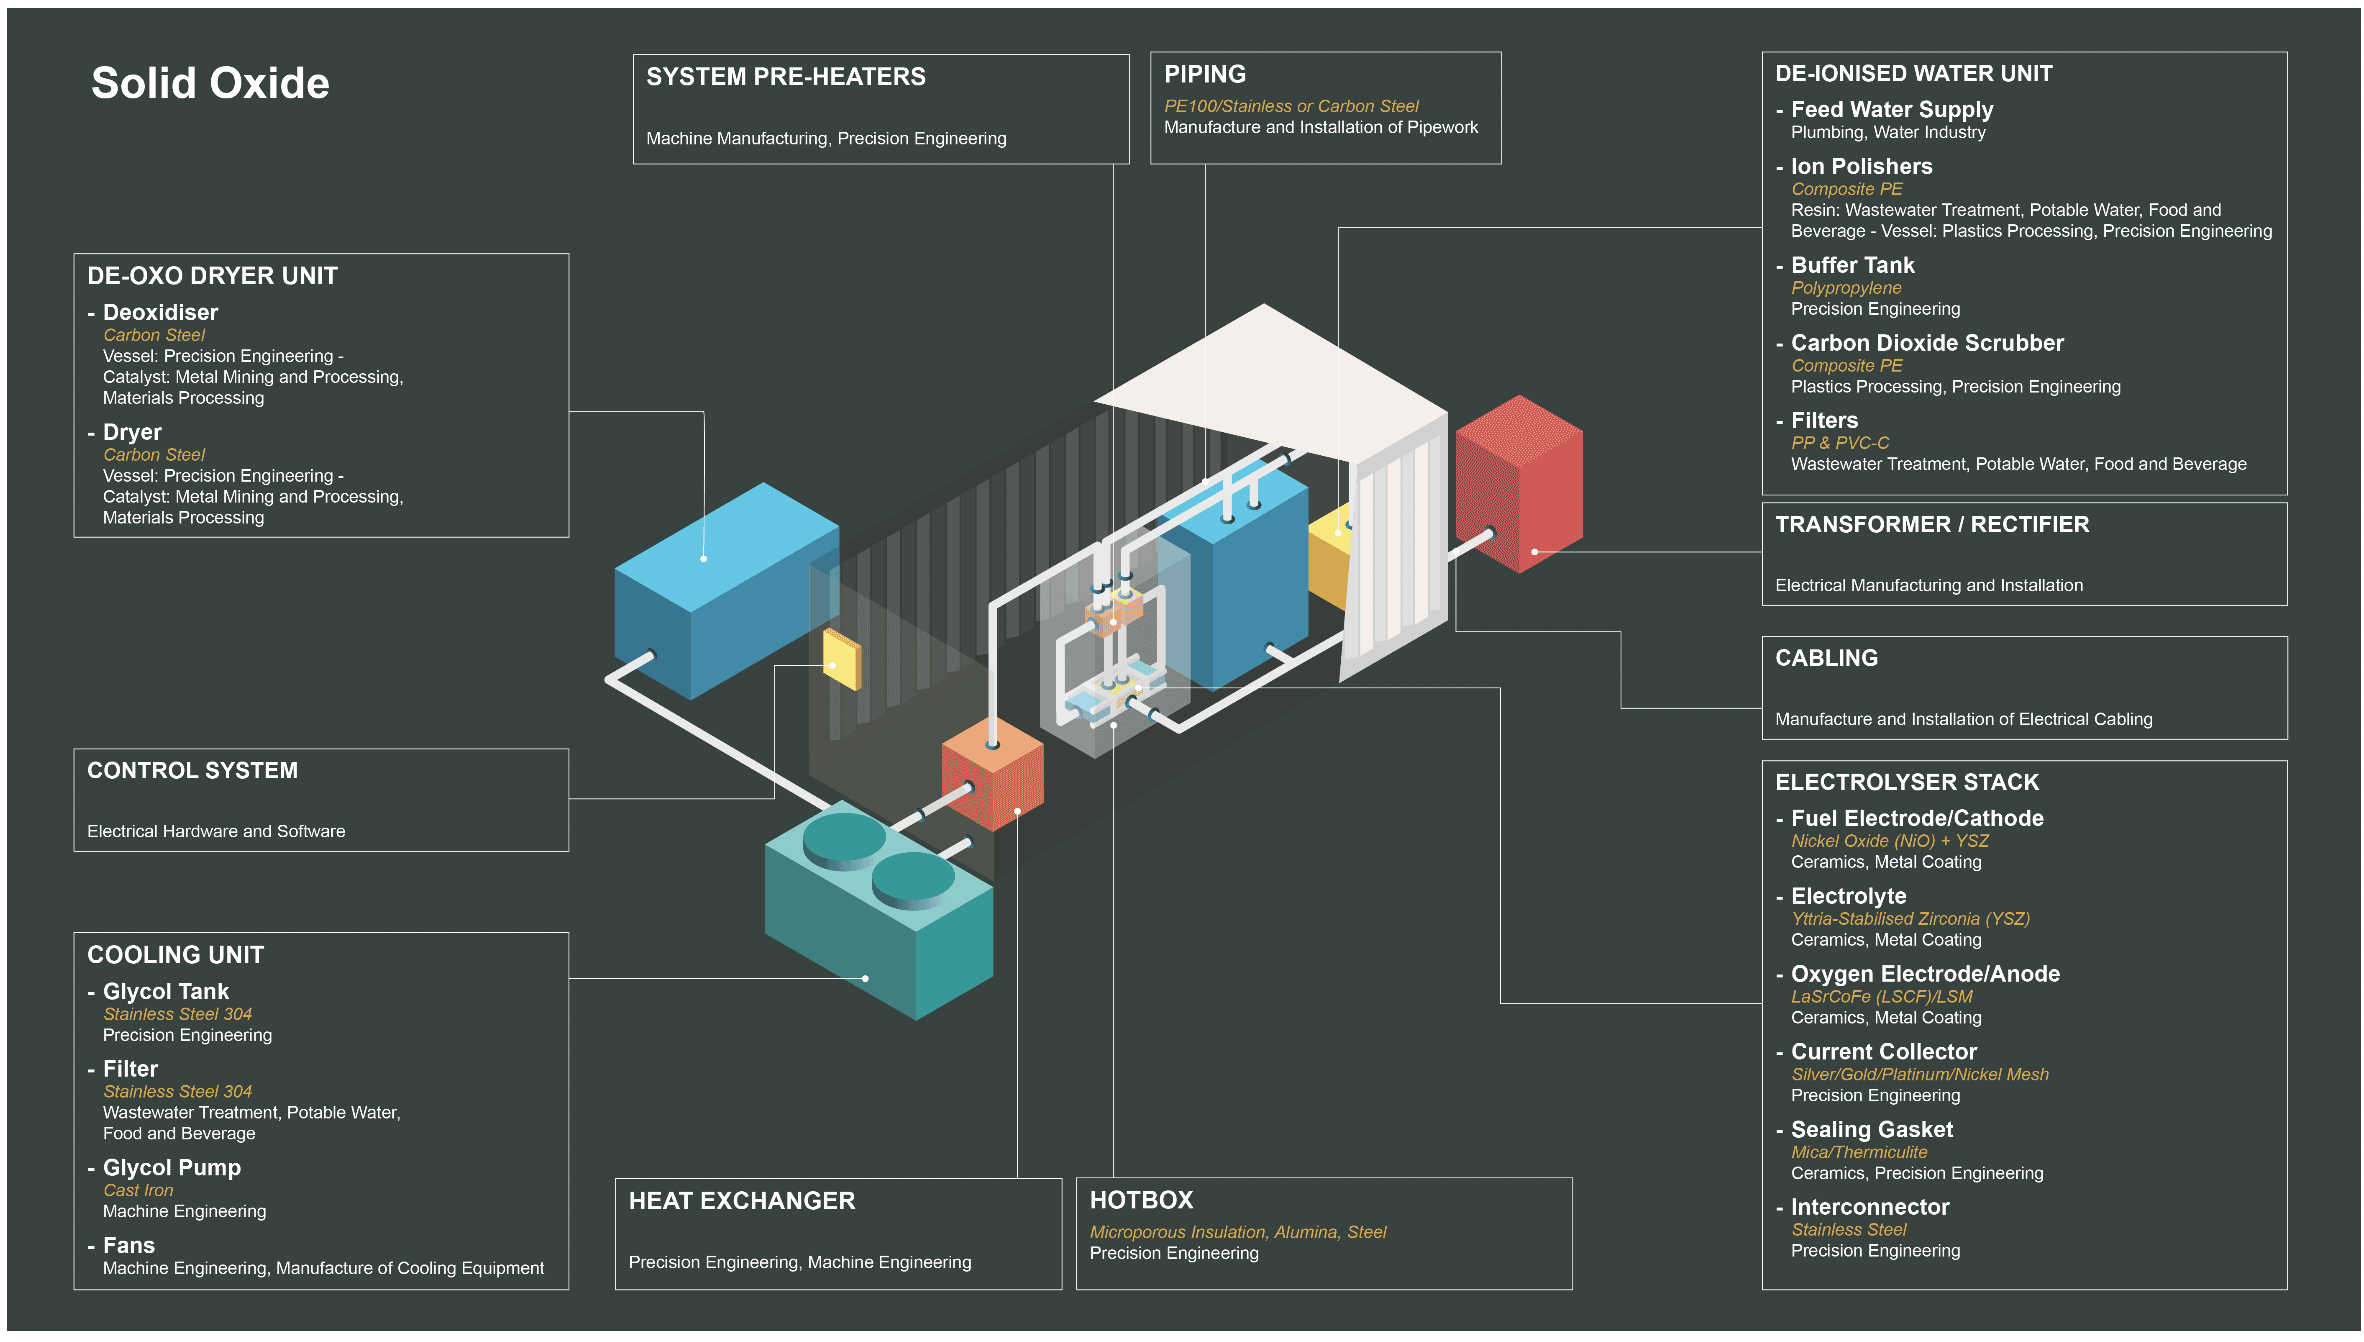 A diagram of a solid oxide electrolyser supply chain. Shows an expanded diagram of what a solid oxide electrolyser looks like inside the container. It includes key systems and their supply chain such as the electrolyser stack, de-oxo dryer unit, de-ionised water unit, system pre-heaters, heat exchanger, hotbox, control system, oxygen-water separation, cooling unit, piping, transformer/rectifier, hydrogen water separation and cabling.